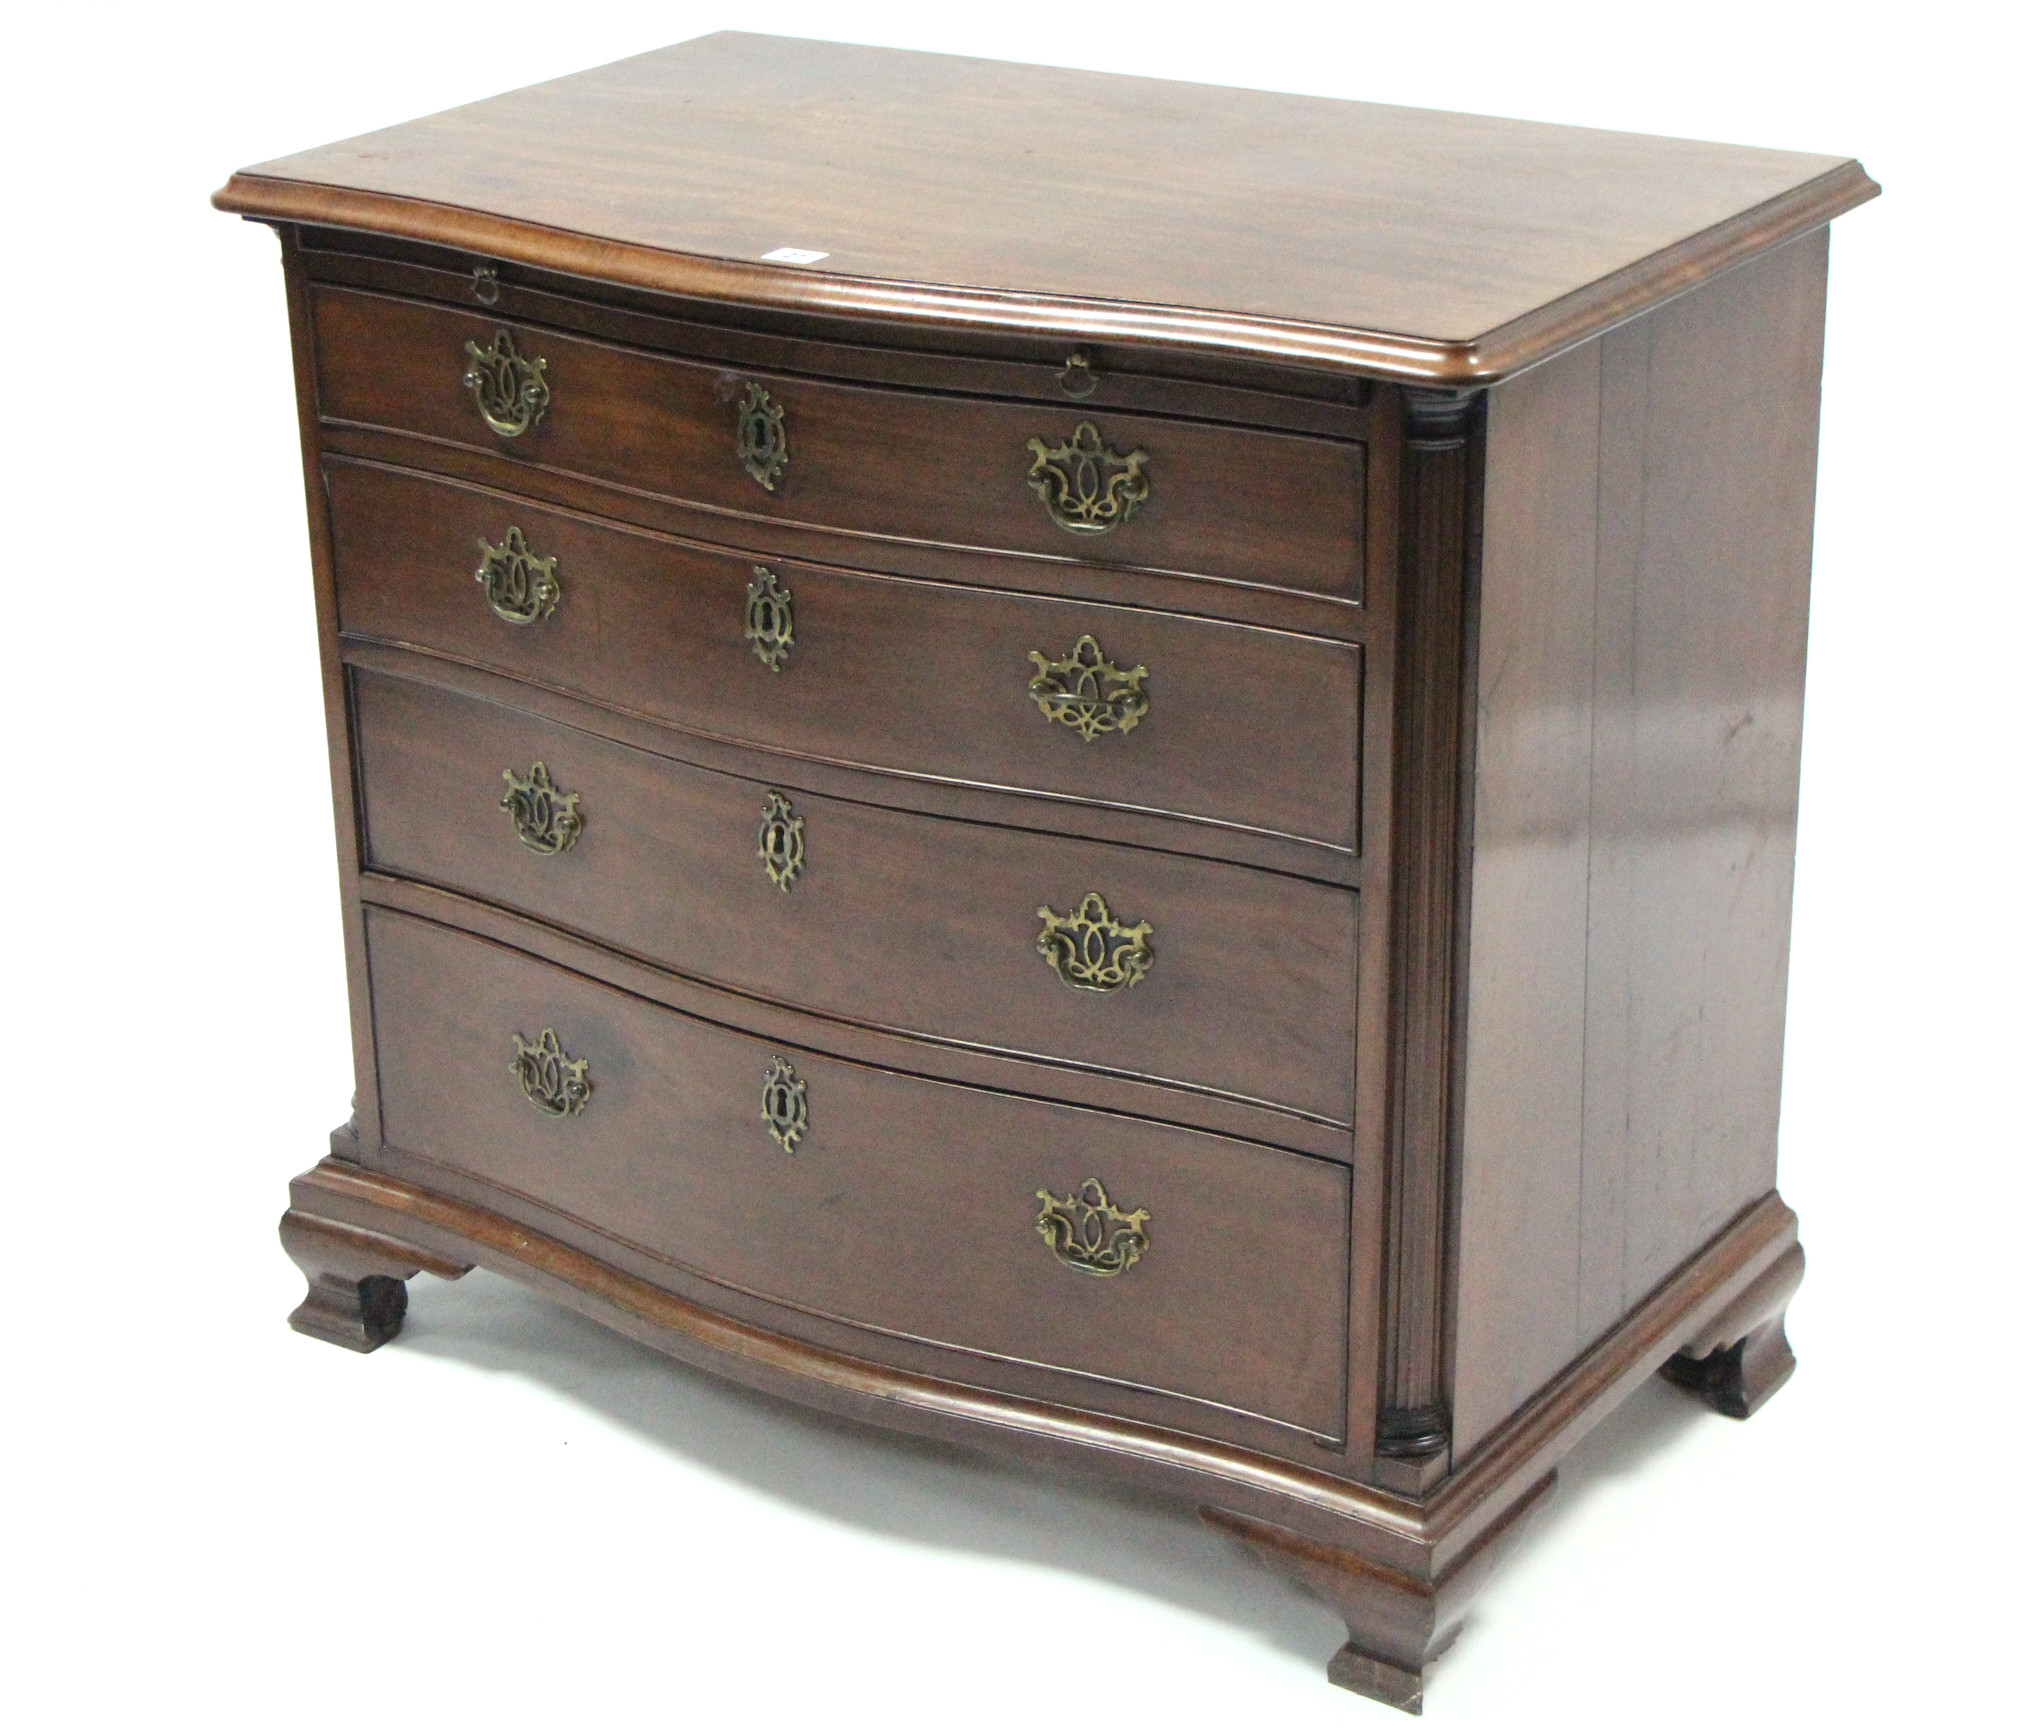 A Georgian-style mahogany serpentine-front chest, fitted four long graduated drawers with brass wing